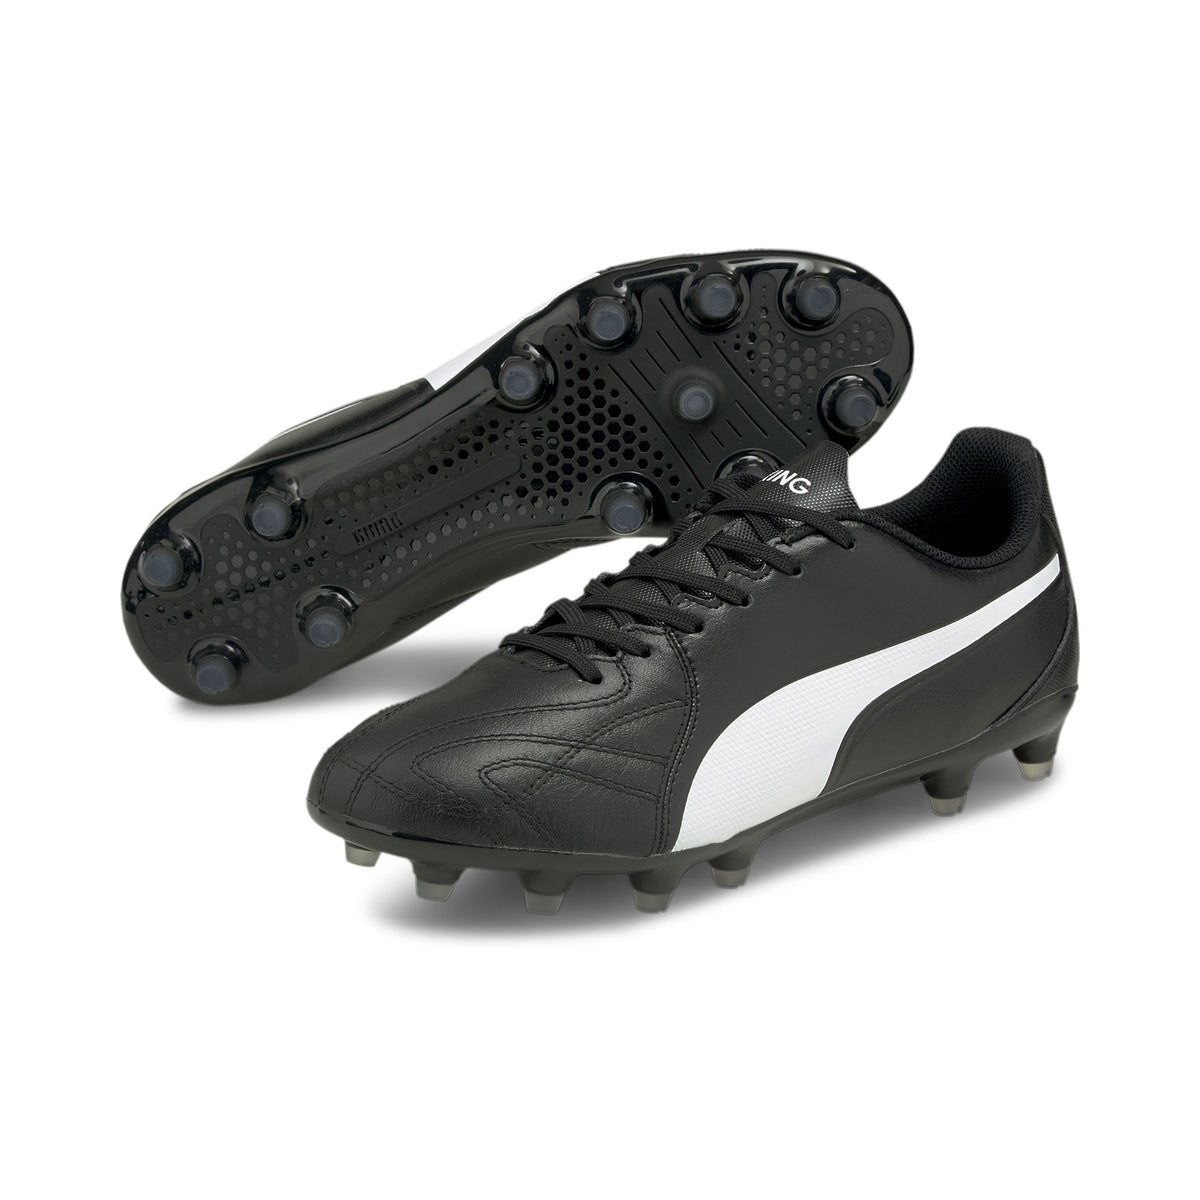 Puma King Hero 21 FG souliers soccer a crampons adultes